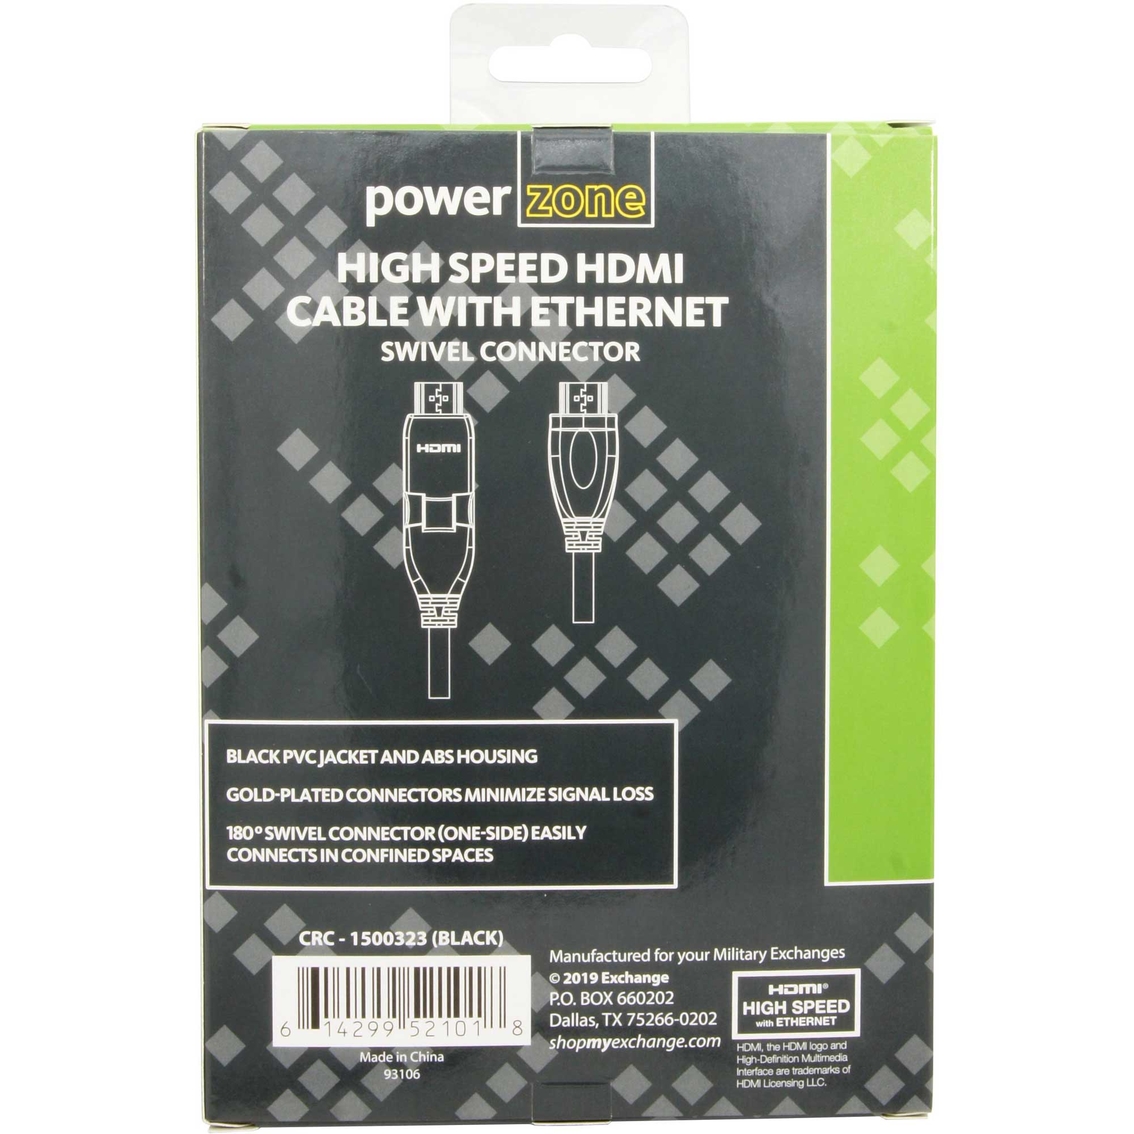 Powerzone HDMI 1.4 High Speed Cable with Swivel Connector - Image 2 of 3